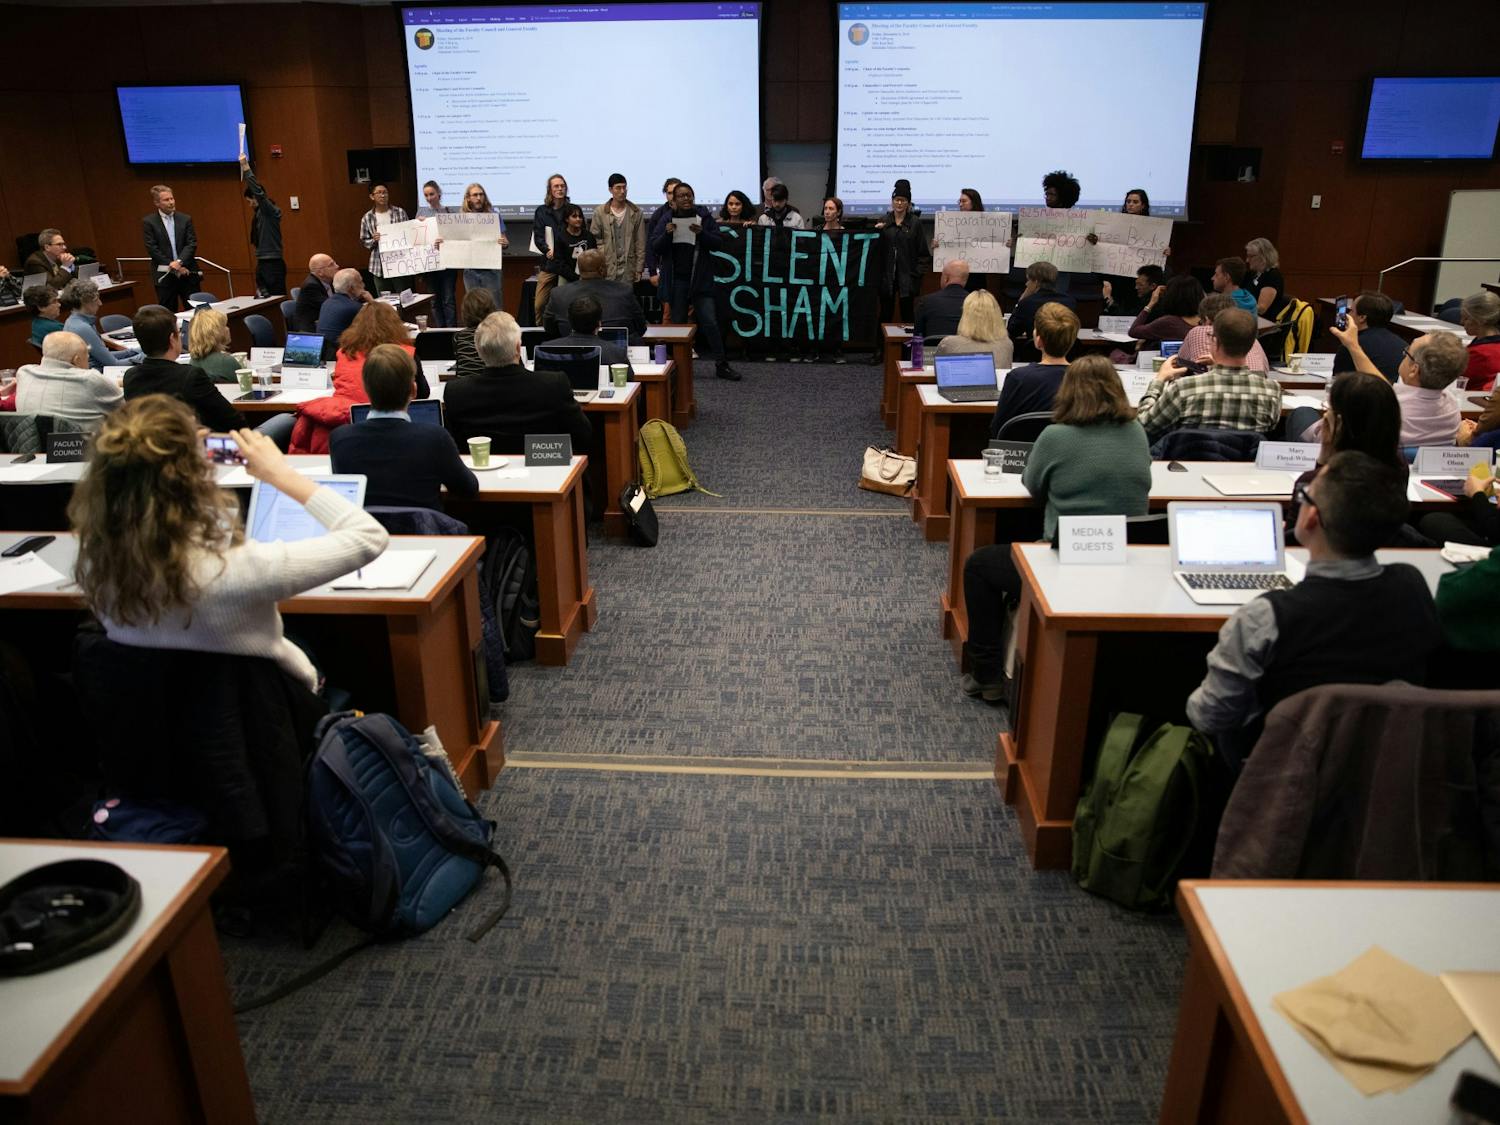 Activists make demands for Interim Chancellor Kevin Guskiewicz on the floor of the Faculty Governance Council for "Reparations, retract or resign" on Friday, Dec. 6, 2019 in Kerr Hall. They referred to a settlement between the University and the Sons of Confederate Veterans to give the SCV Silent Sam and a trust fund of $2.5 million.